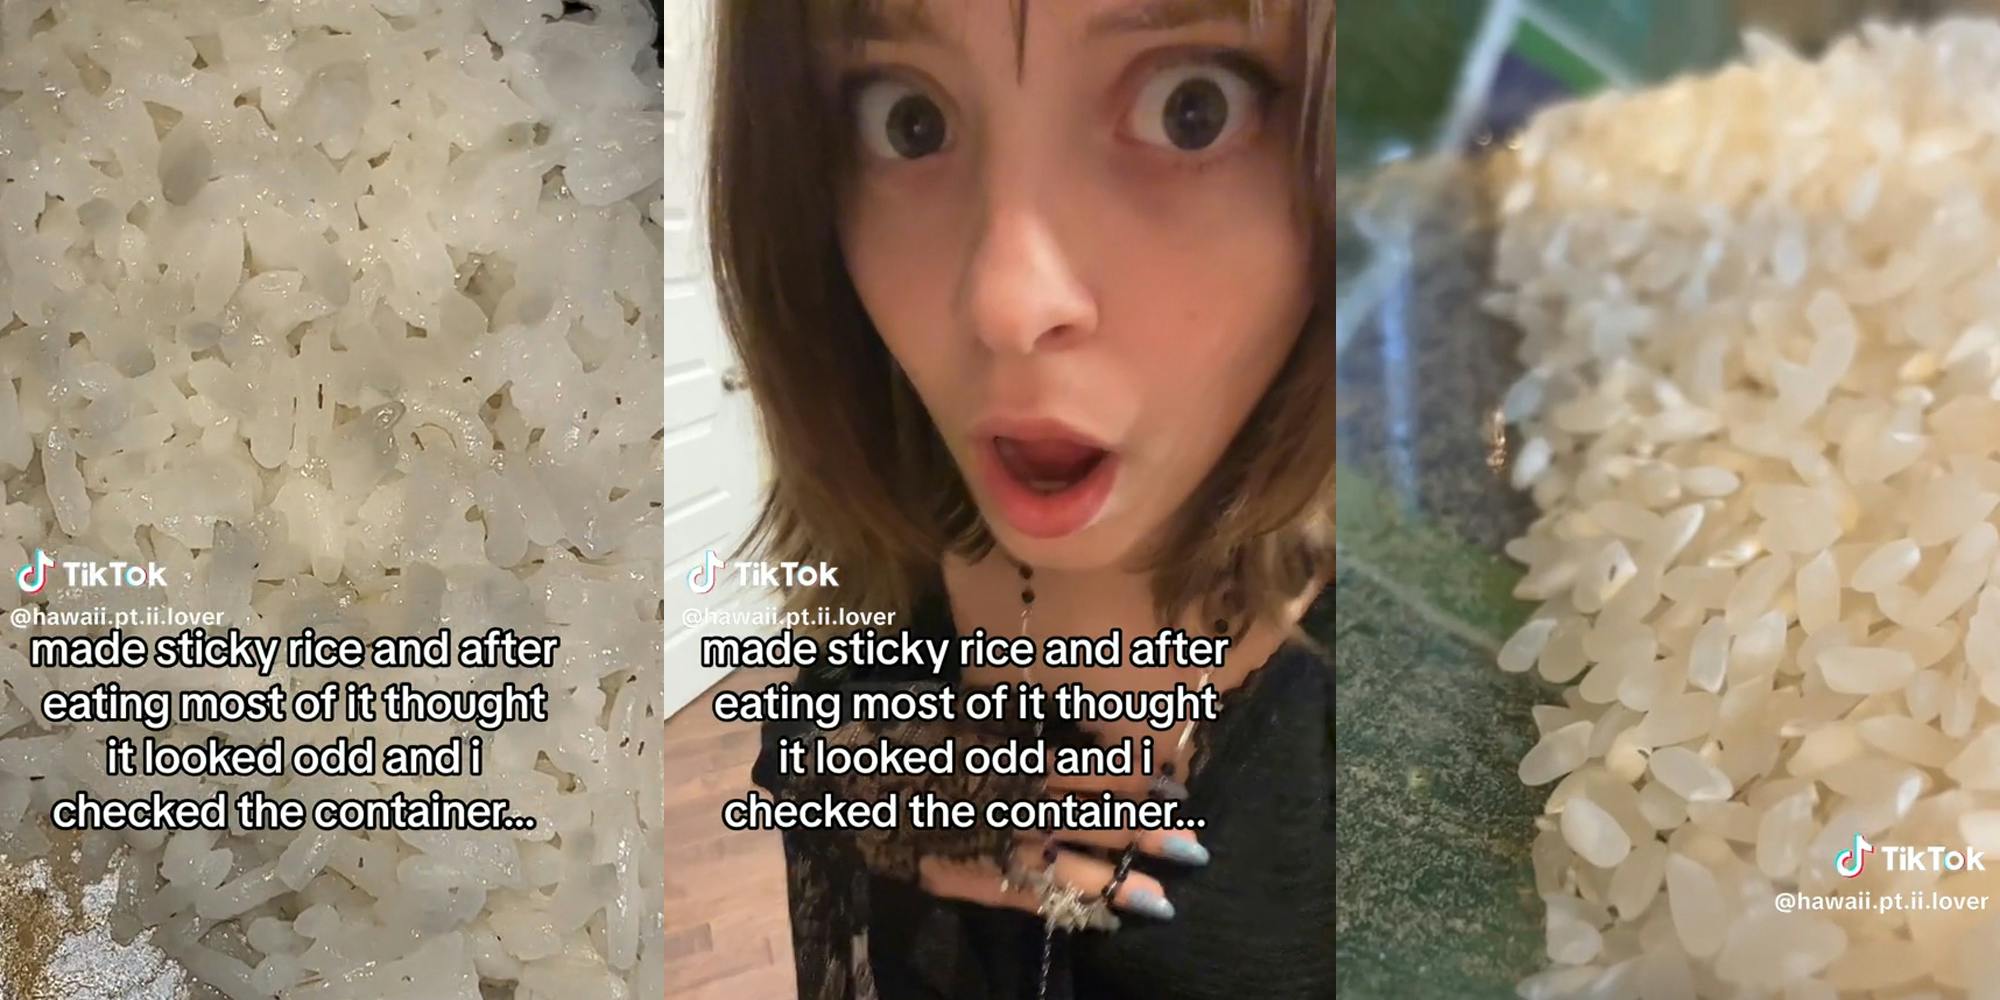 sticky rice with gray spots (l) shocked young woman (c) rice with bugs crawling on it (r) all captioned "made sticky rice and after eating most of it thought it looked odd and i checked the container.."